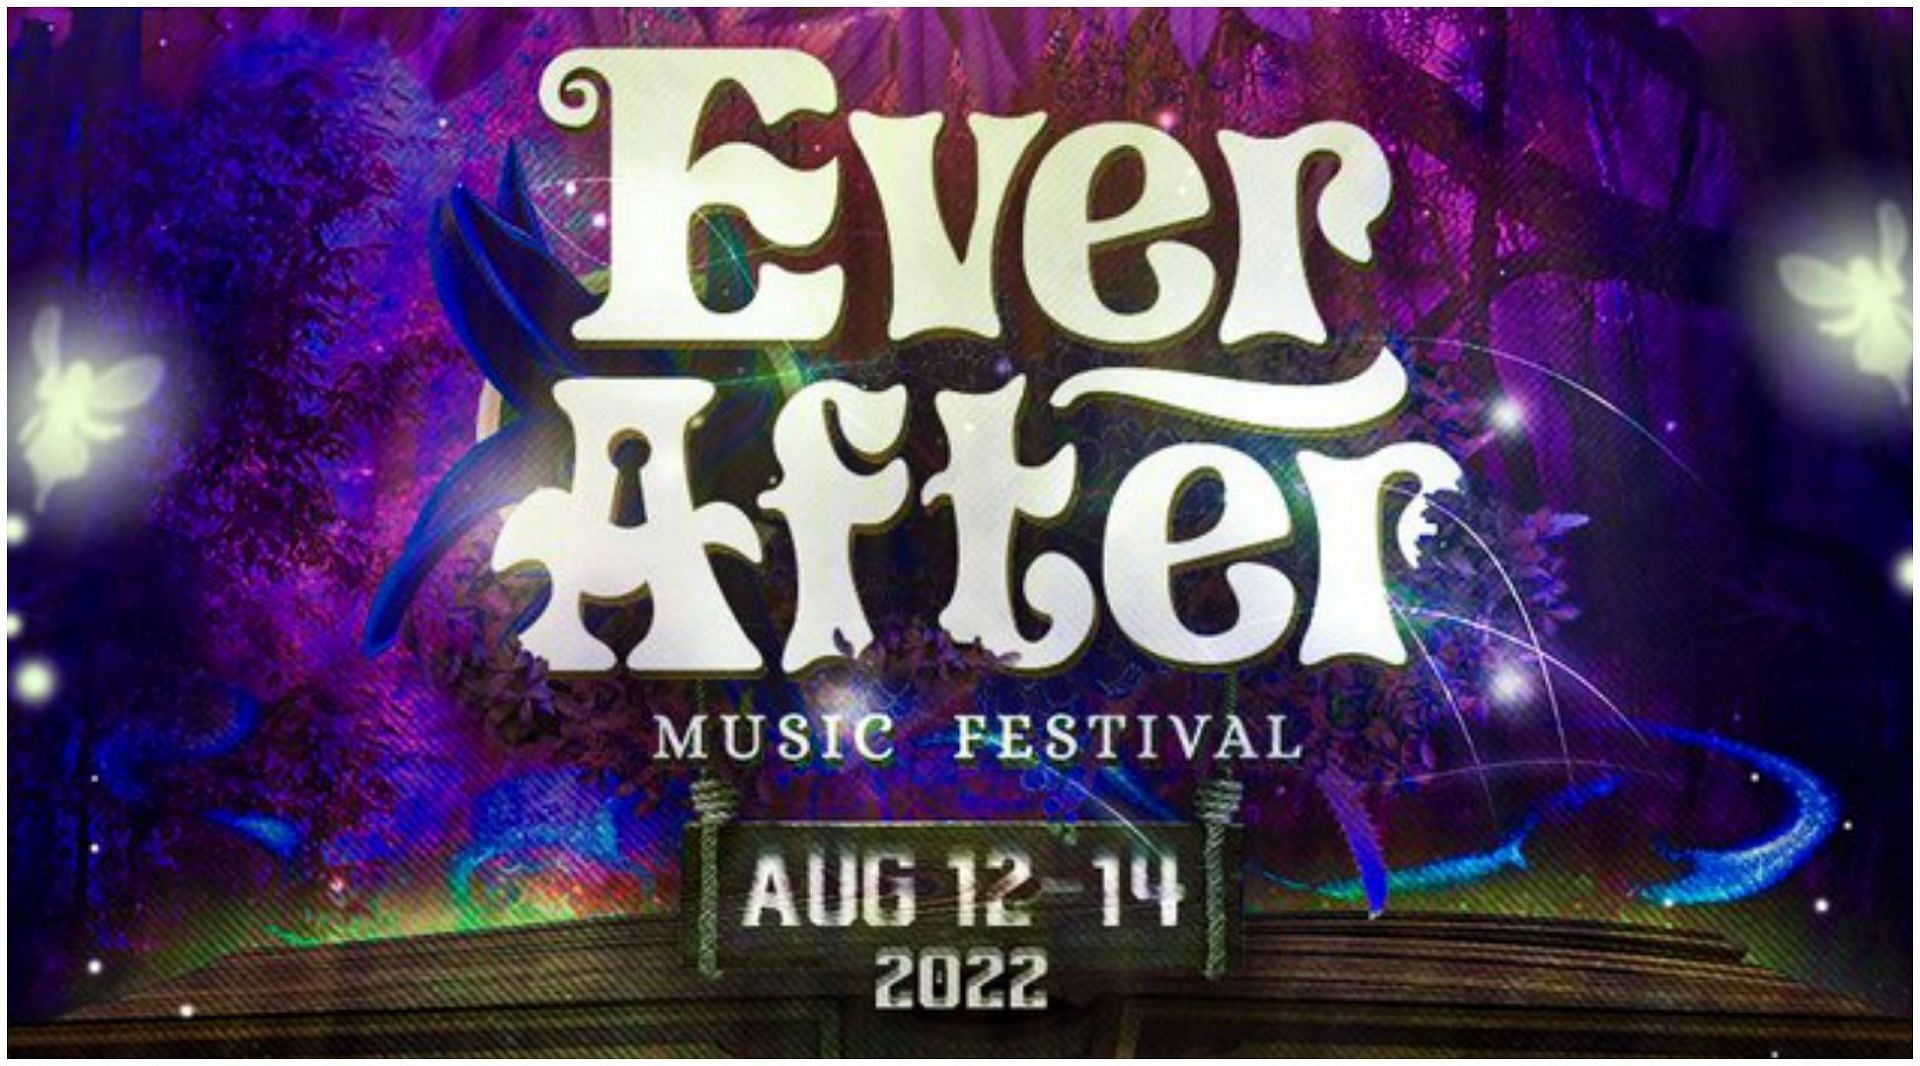 Connaisseurs of the sounds of bass and house music are in for a treat this summer, as the Ever After Music Festival is set to return from its two-year COVID-induced hiatus this summer. (Image via Twitter)